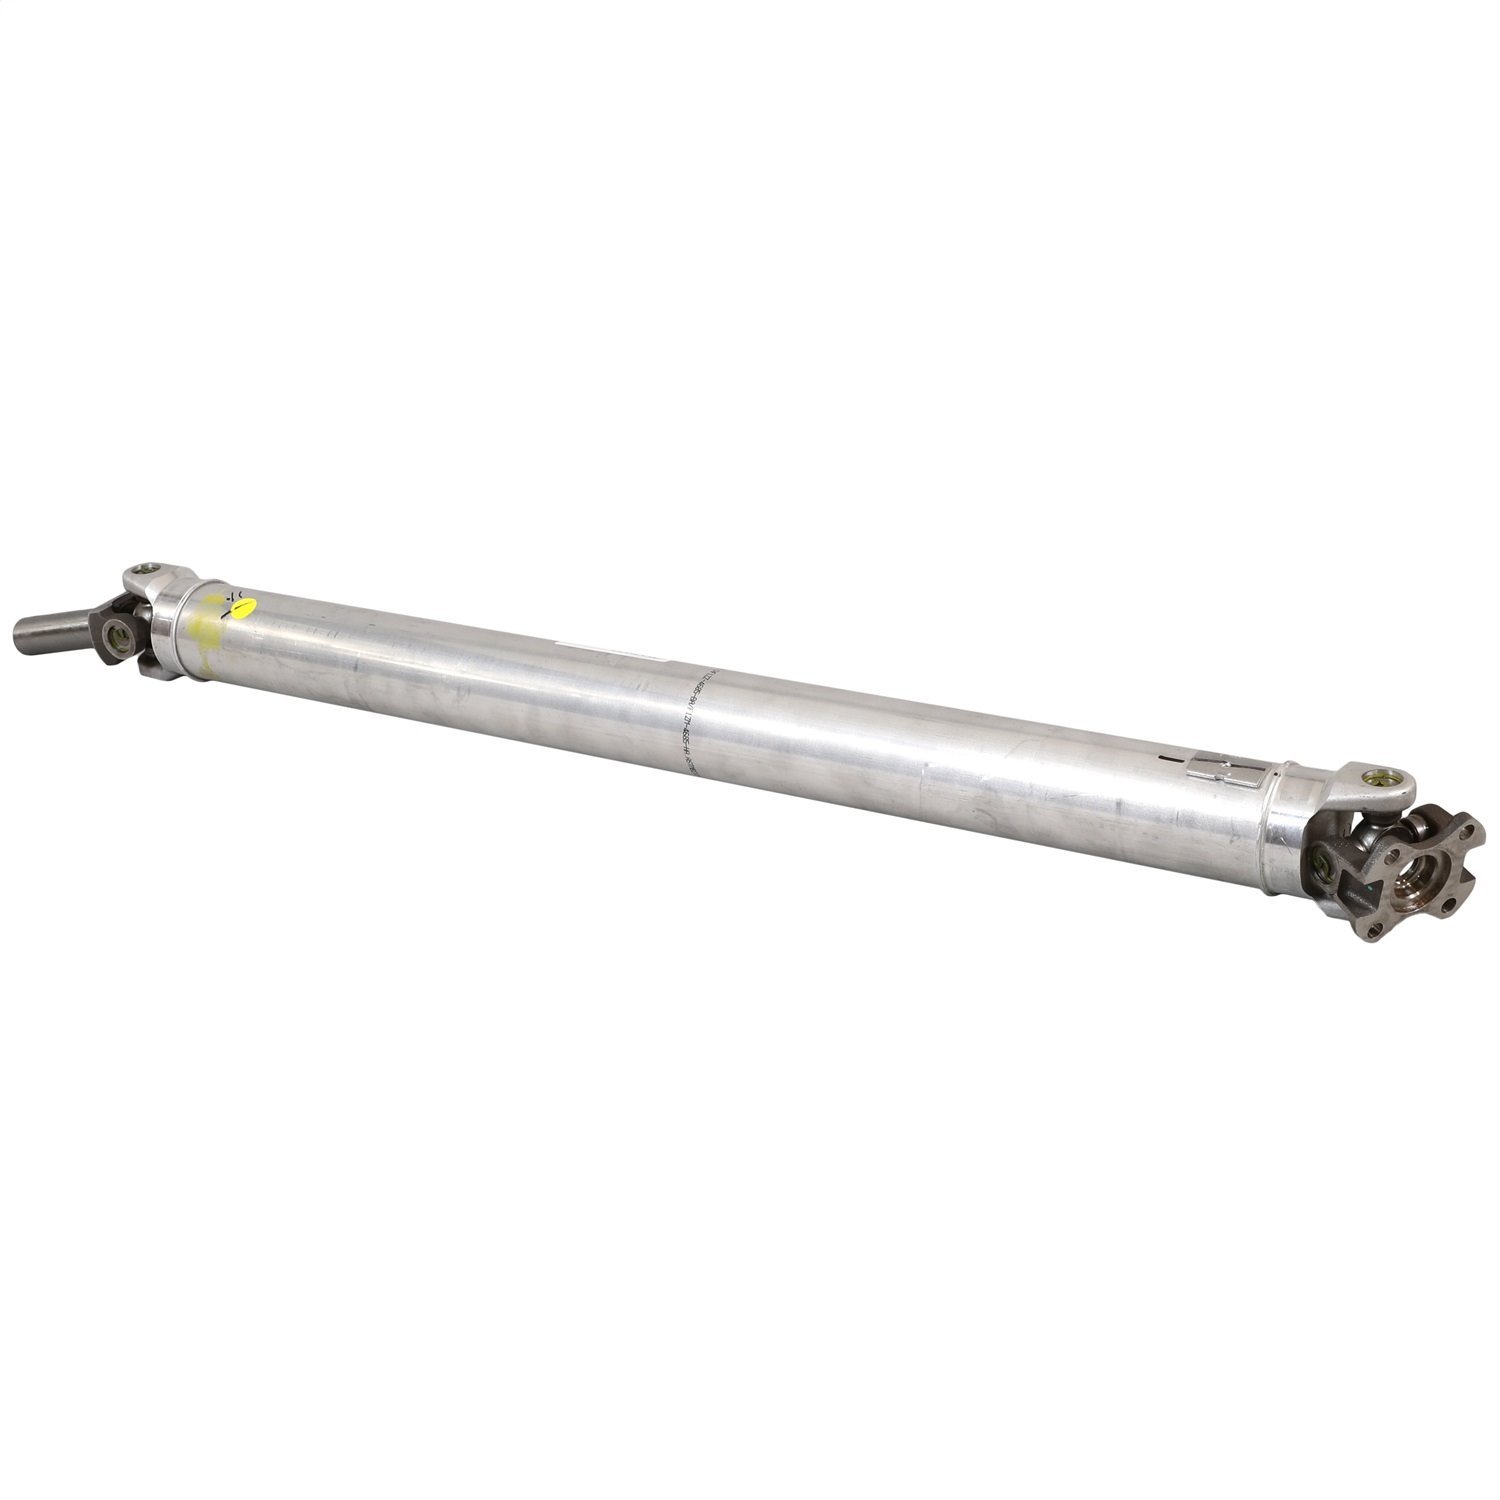 HD Aluminum Driveshaft Assembly for 1979-1995 Ford Mustang,